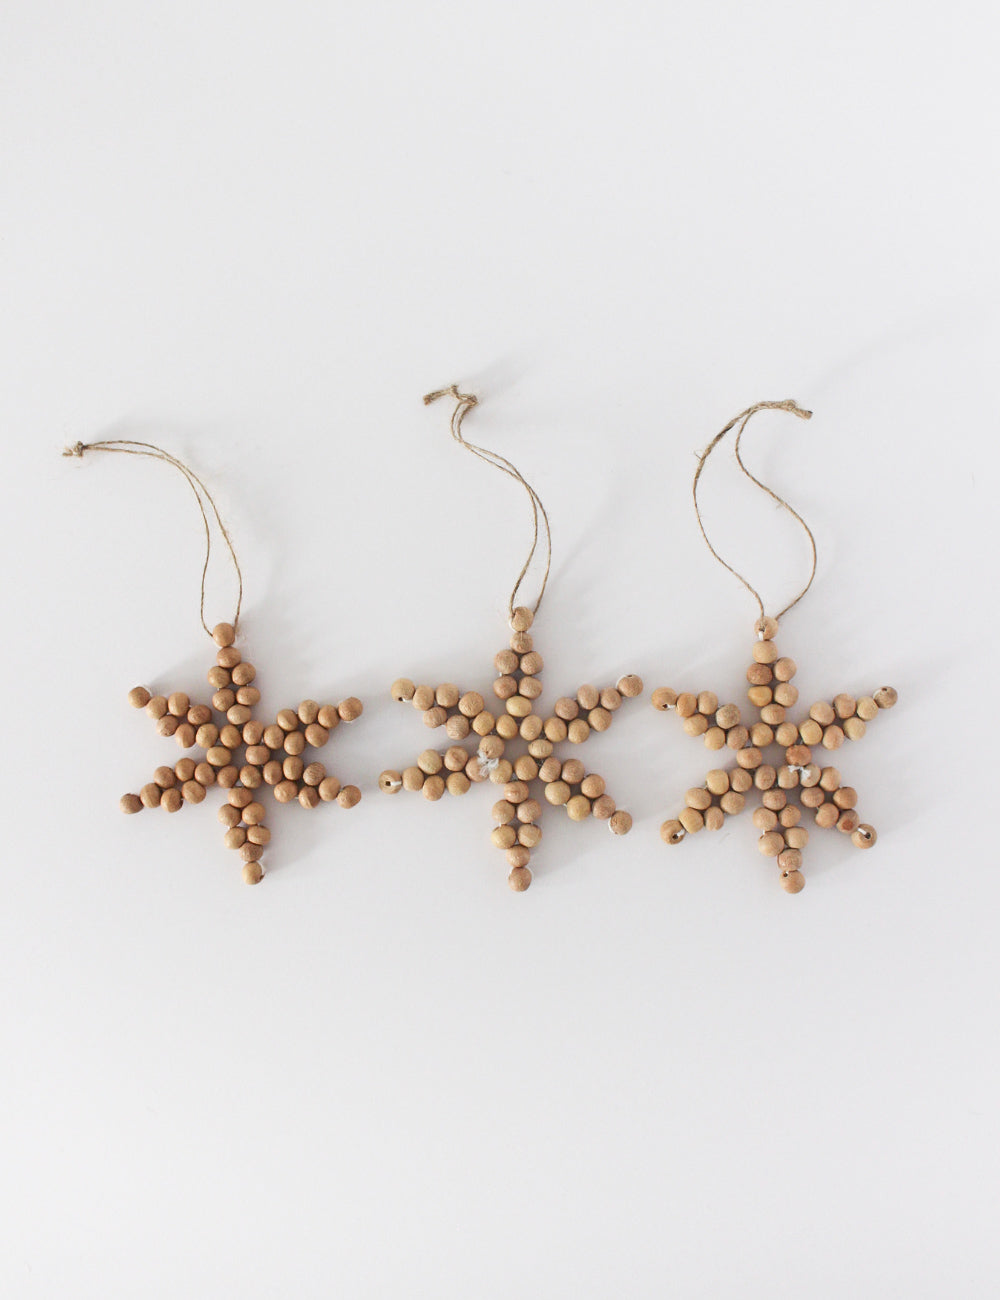 Wooden Beaded Snowflake Ornaments - Set of 3